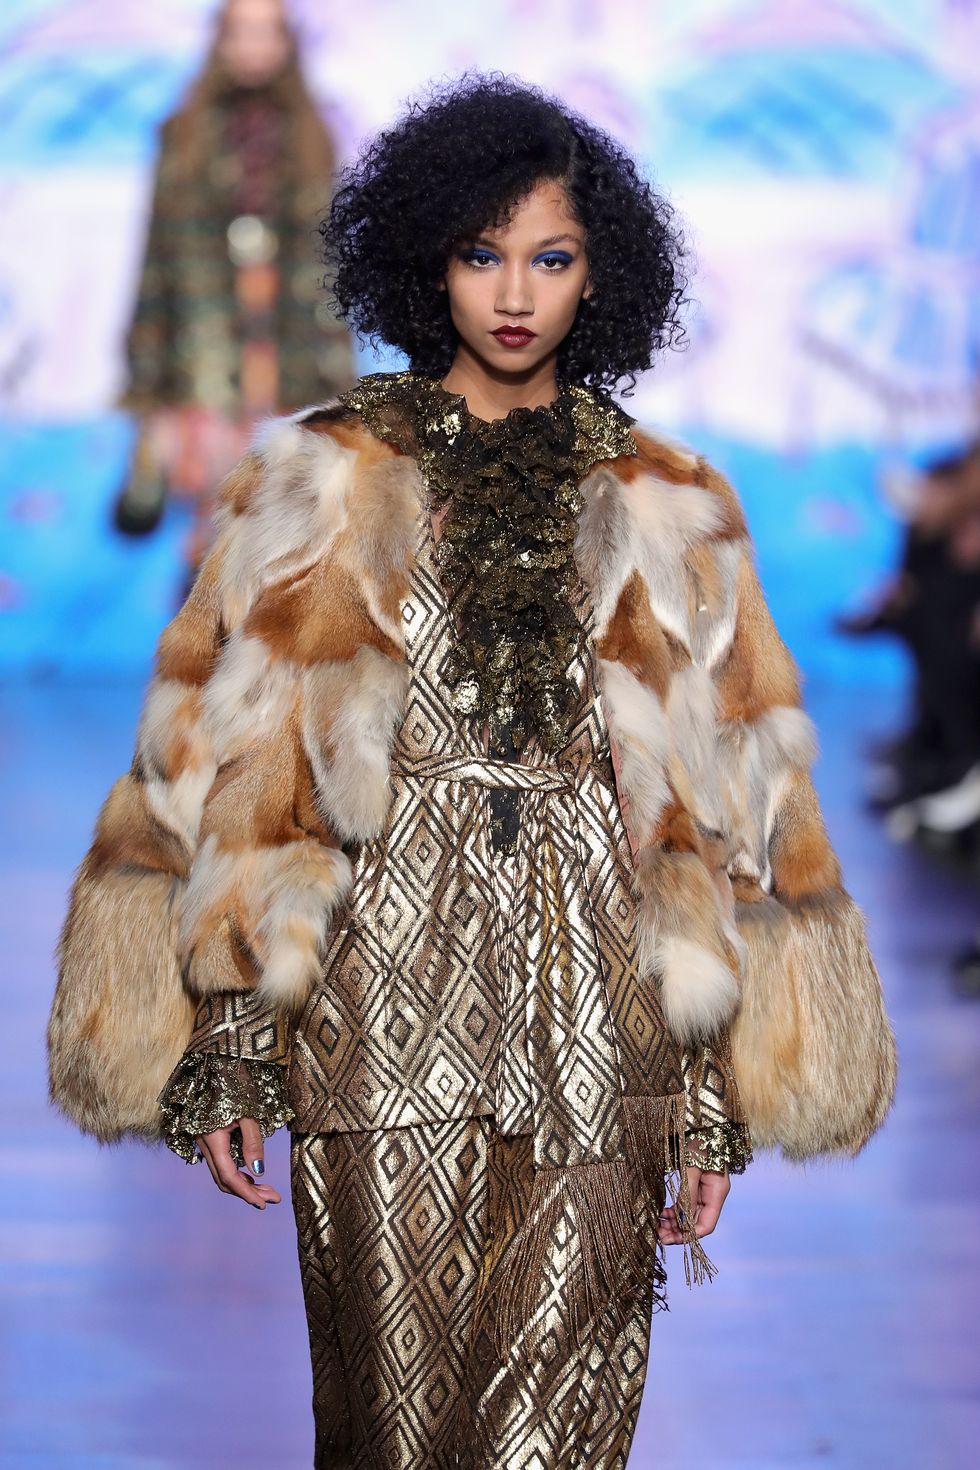 Skin, Winter, Fashion show, Textile, Fur clothing, Outerwear, Style, Fashion model, Jheri curl, Natural material, 